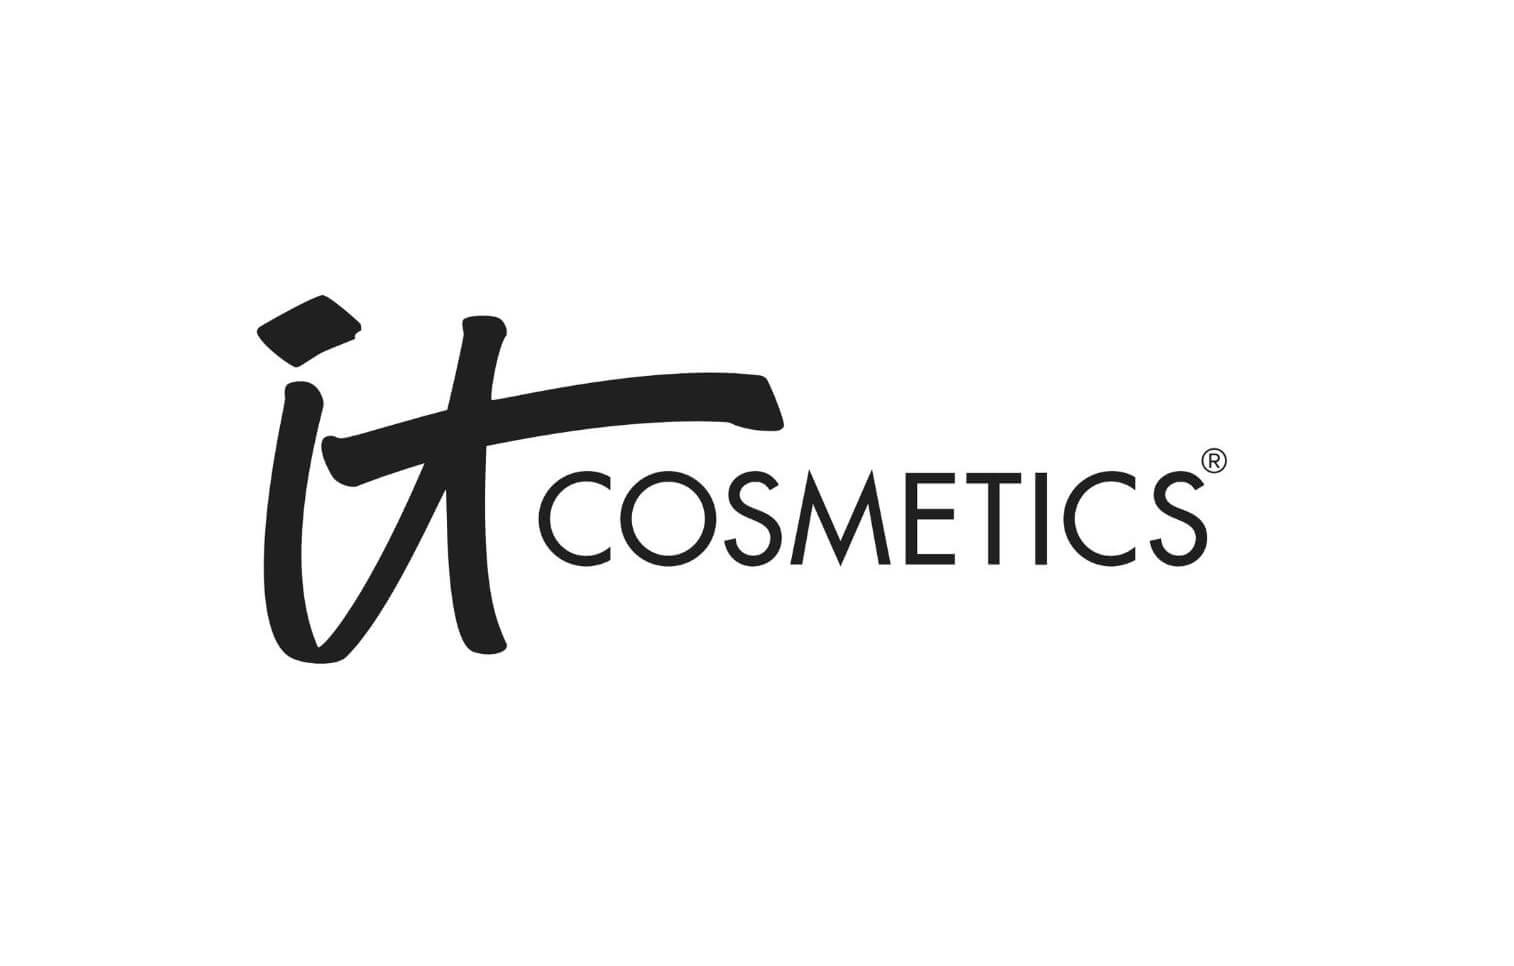 IT COSMETICS - Extra 15% Off $30+ Eligible Items